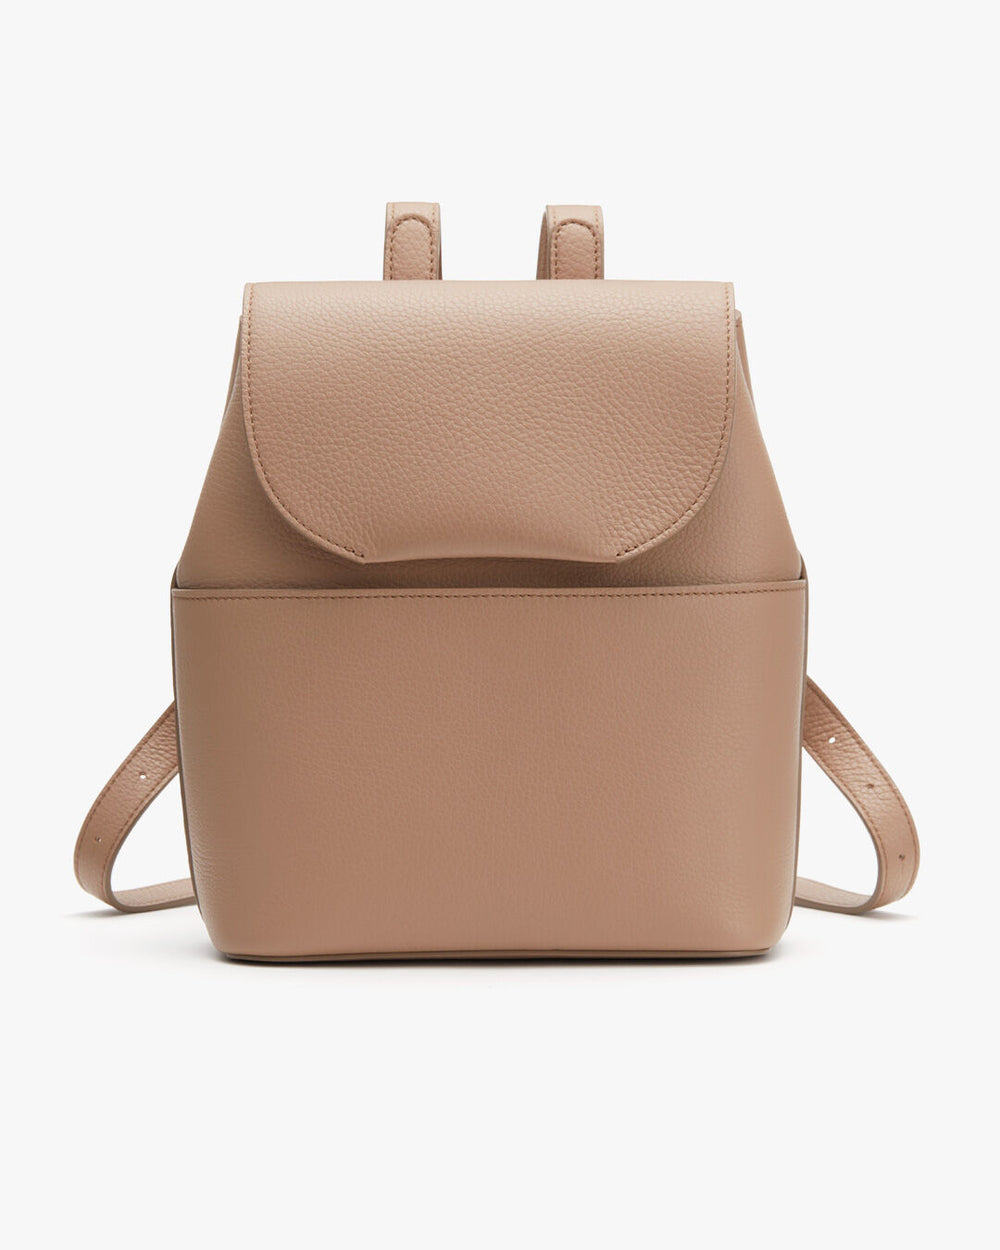 A simple backpack with a flap closure and adjustable straps.